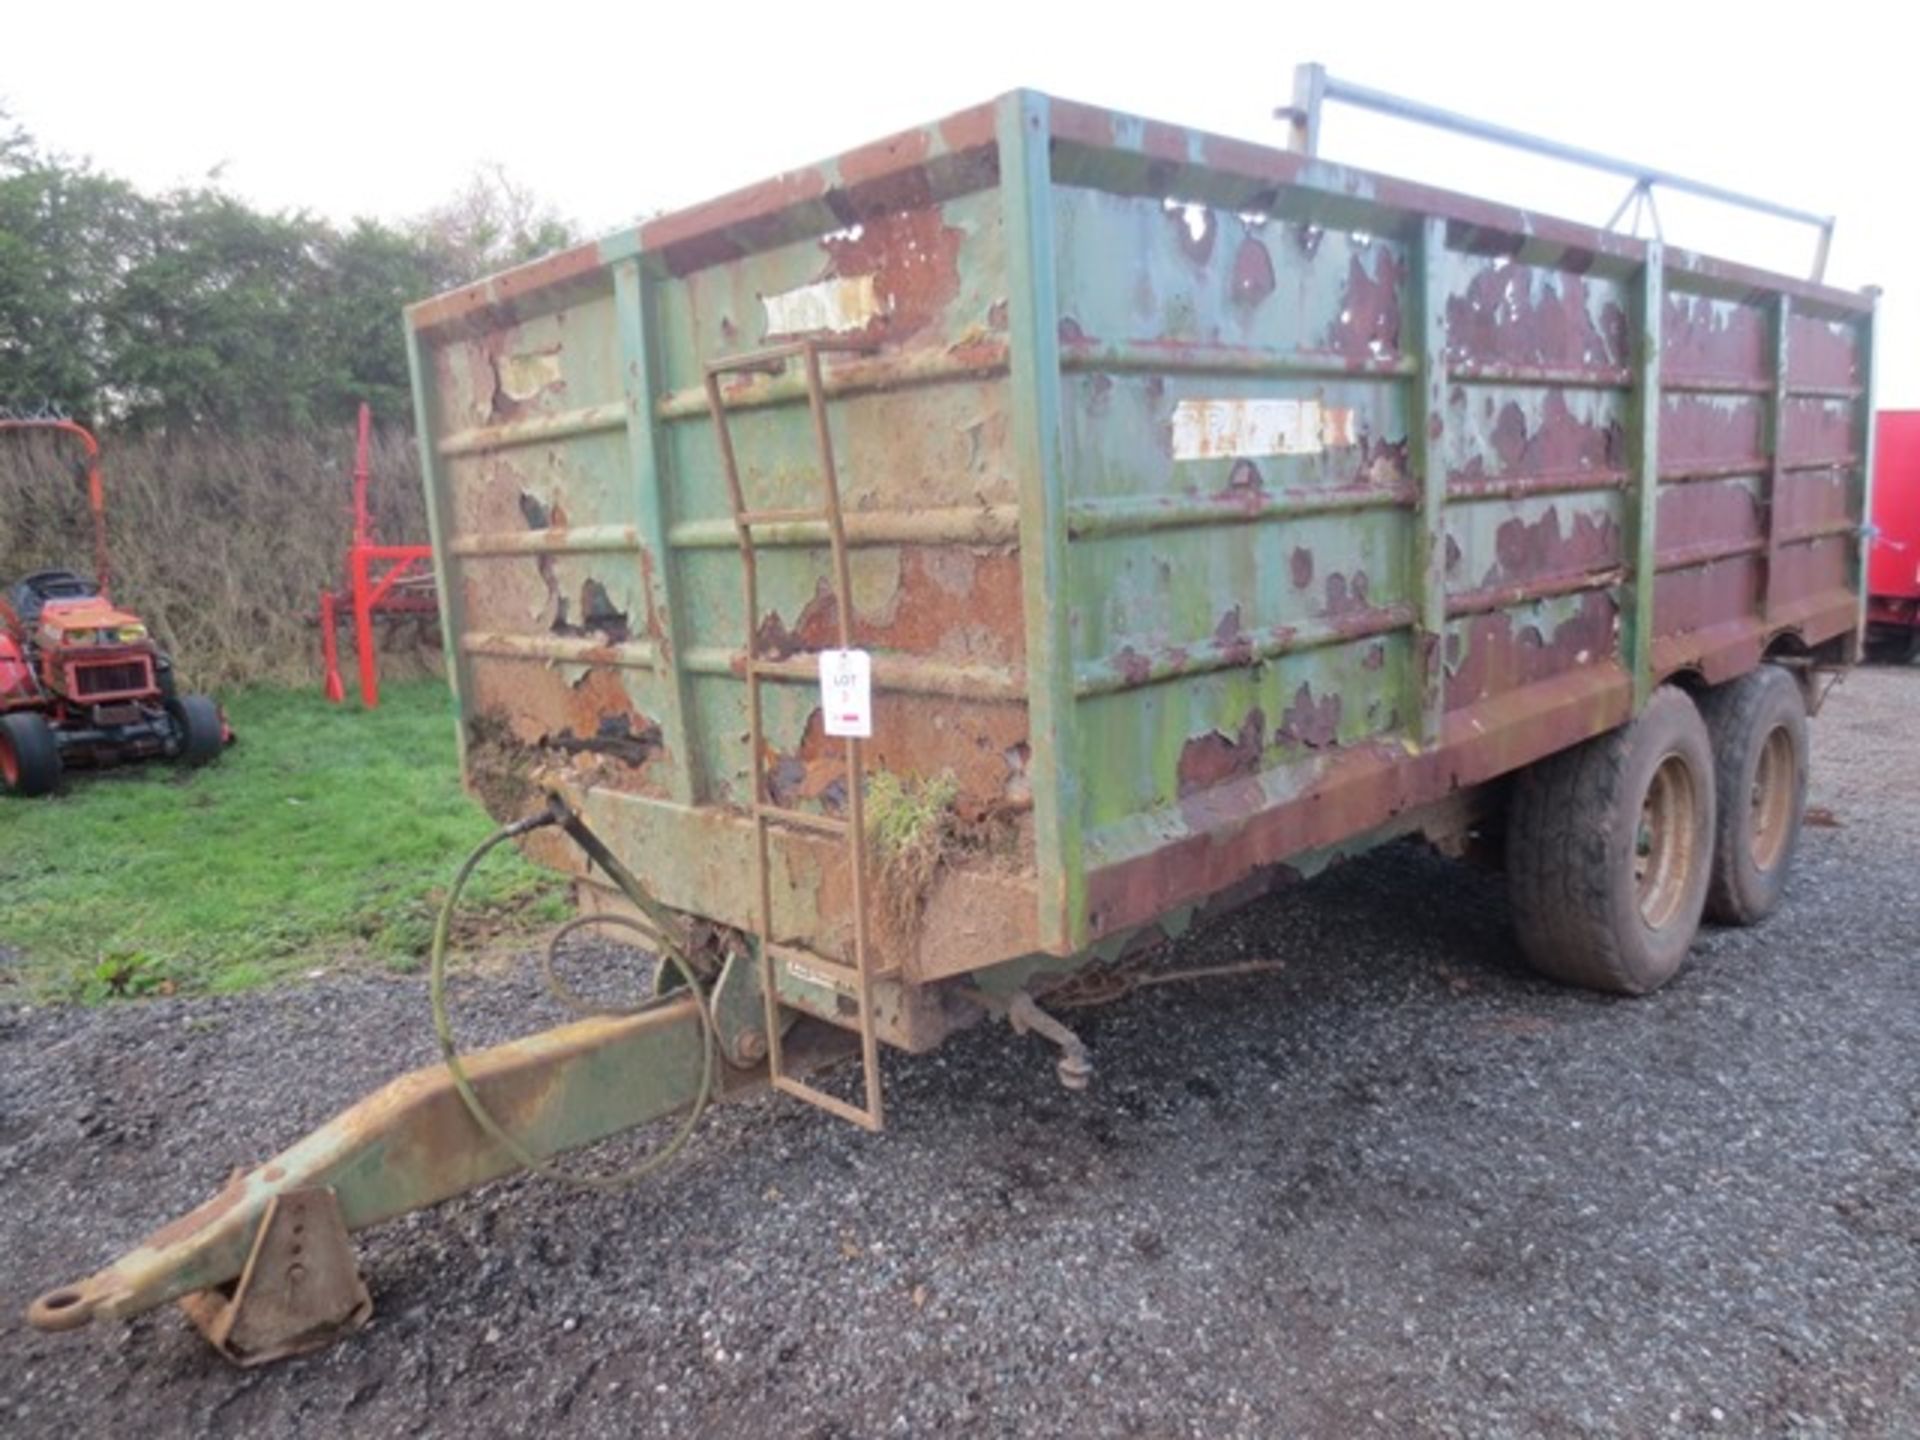 Fraser M18TS agricultural trailer, Serial No: 39156 (Poor condition)